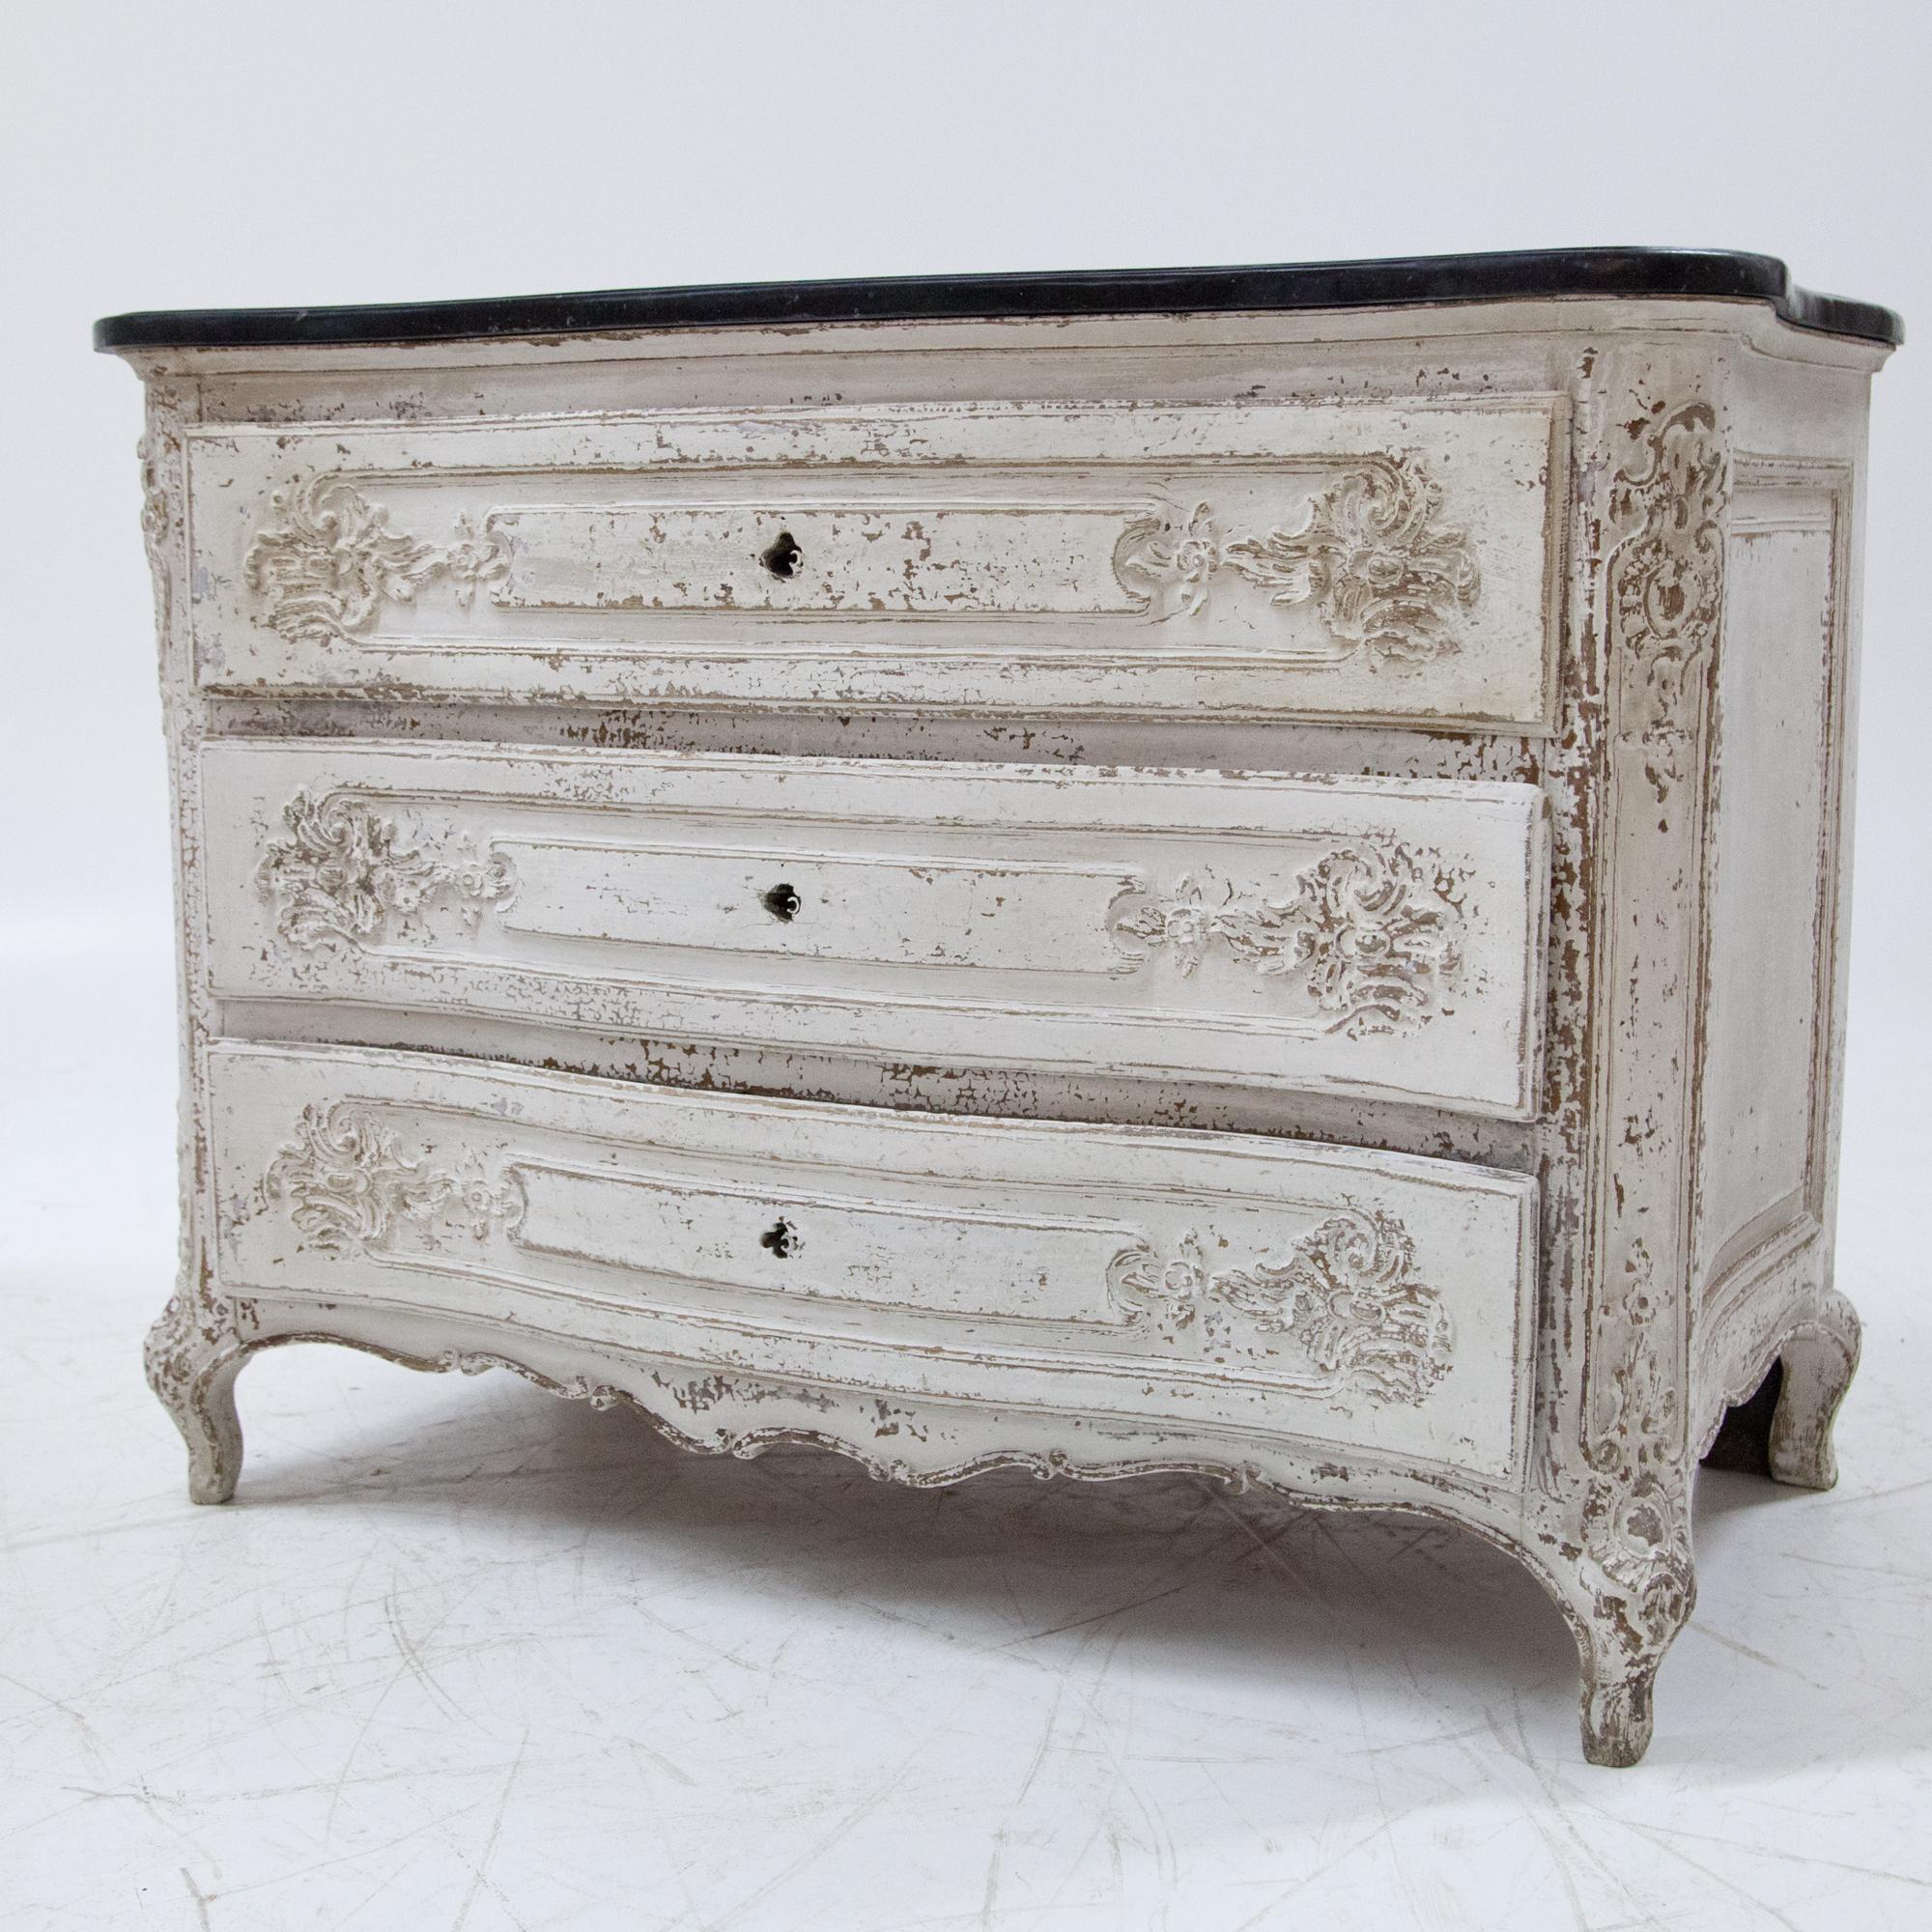 Baroque commode with a black marble top, three drawers and slightly curved front and sides standing on S-shaped feet. The sides with profiled filling panels, the fronts with floral relief carvings. The corners are also decorated with rocailles and